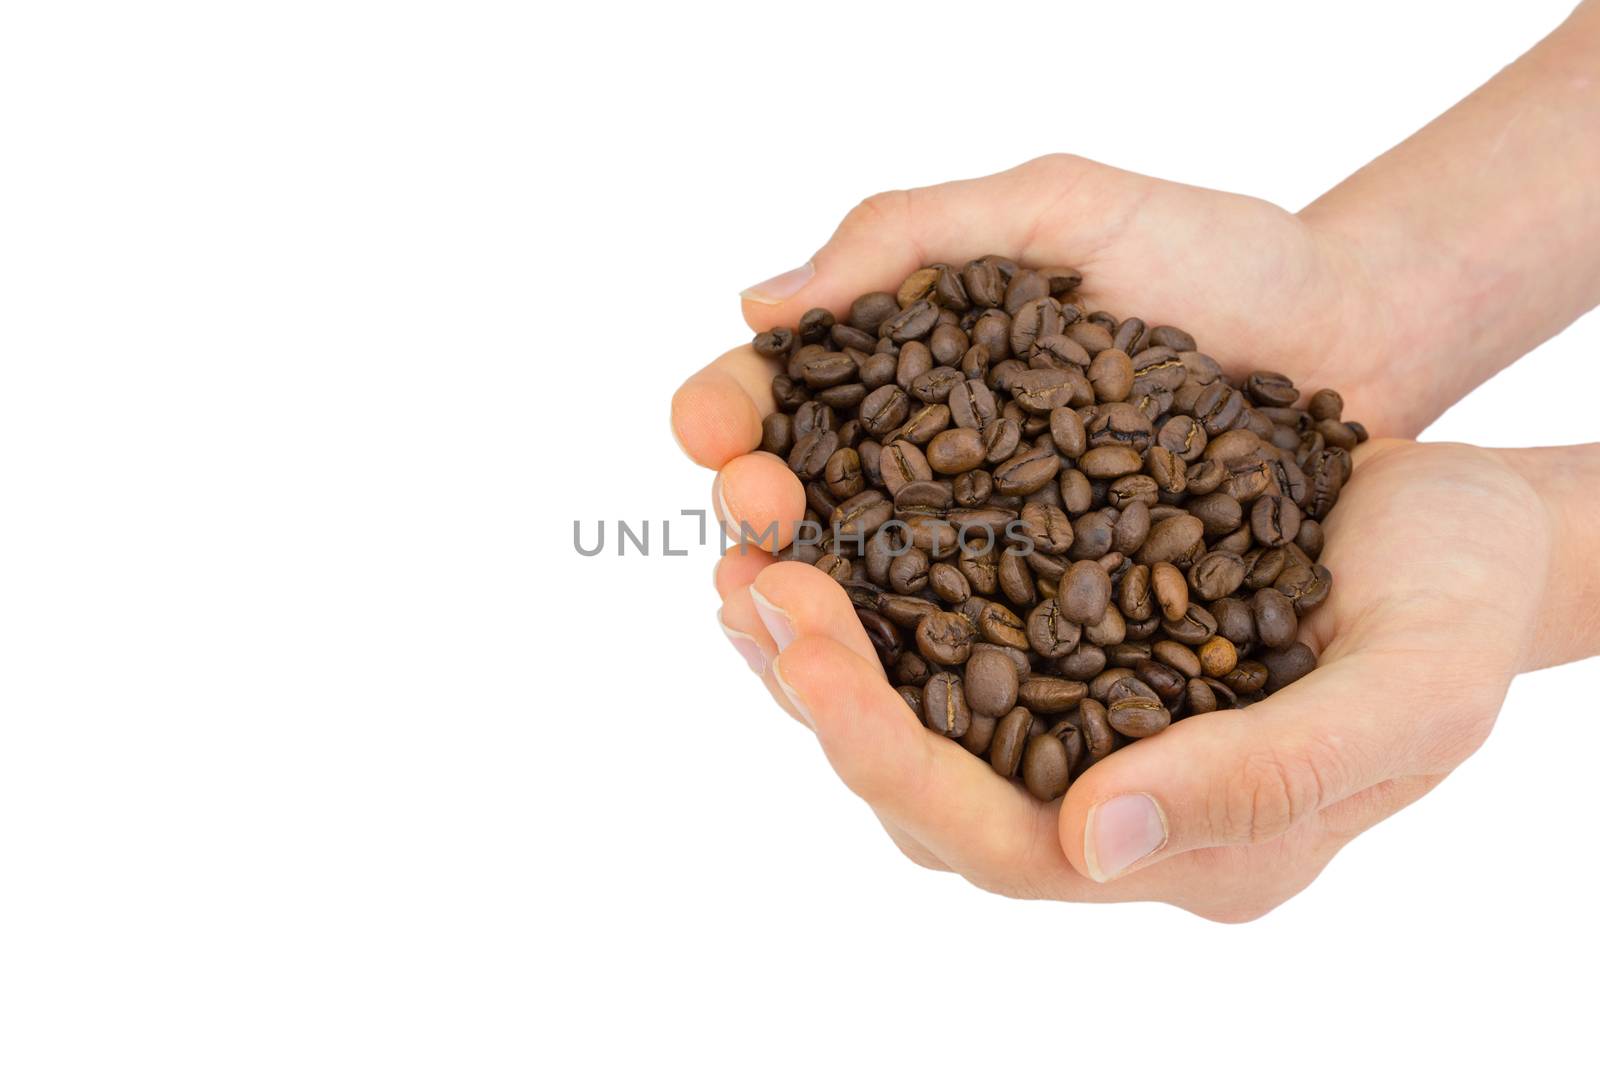 Two hands holding coffee beans by BenSchonewille